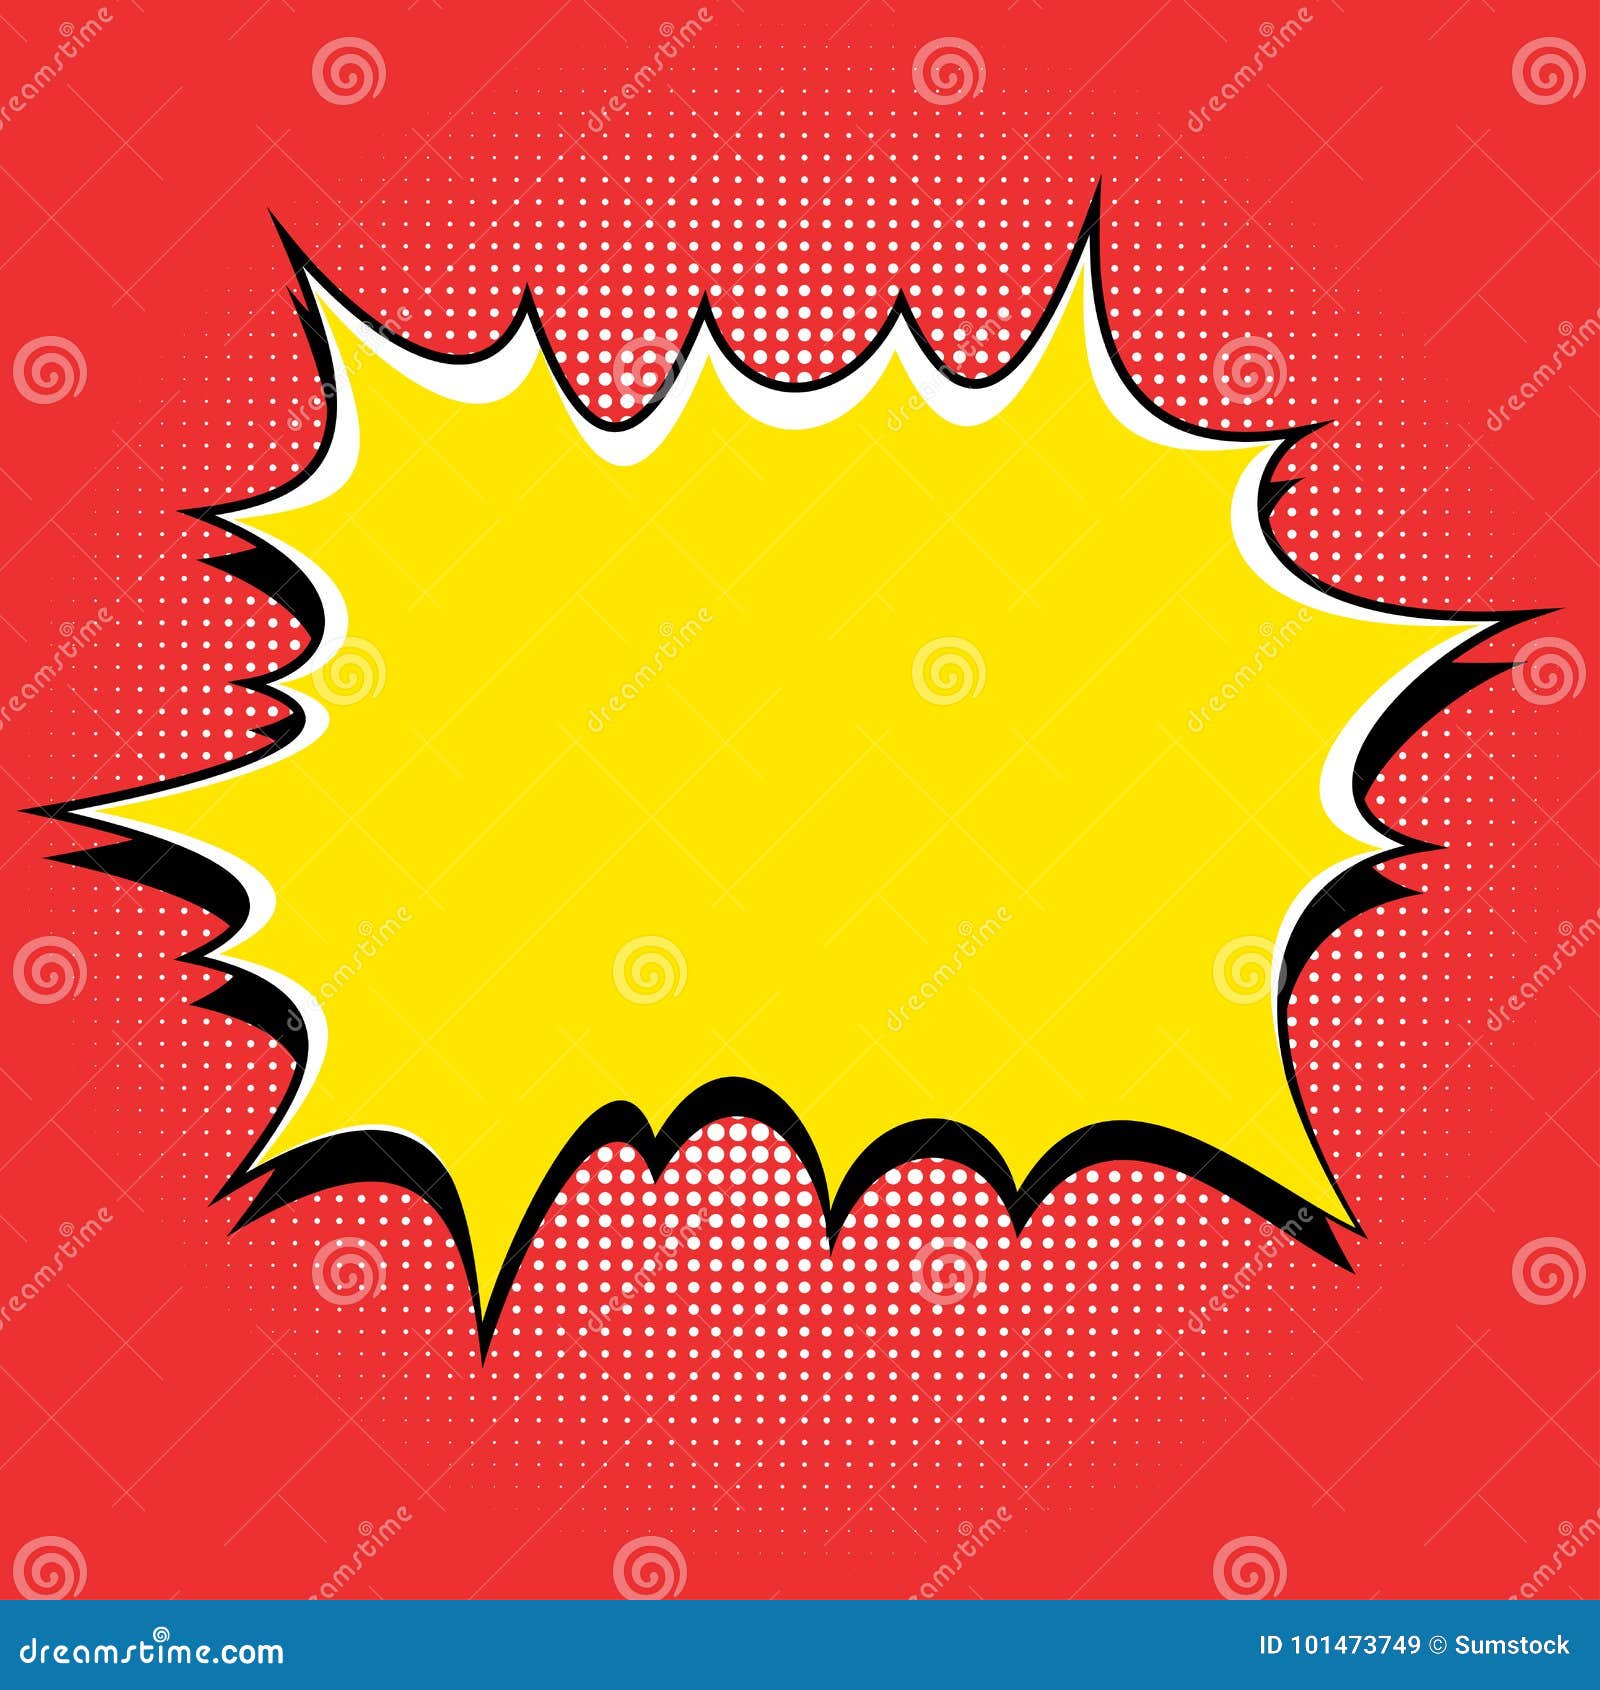 Comic Book Style Yellow Burst on Red Background Stock Vector ...